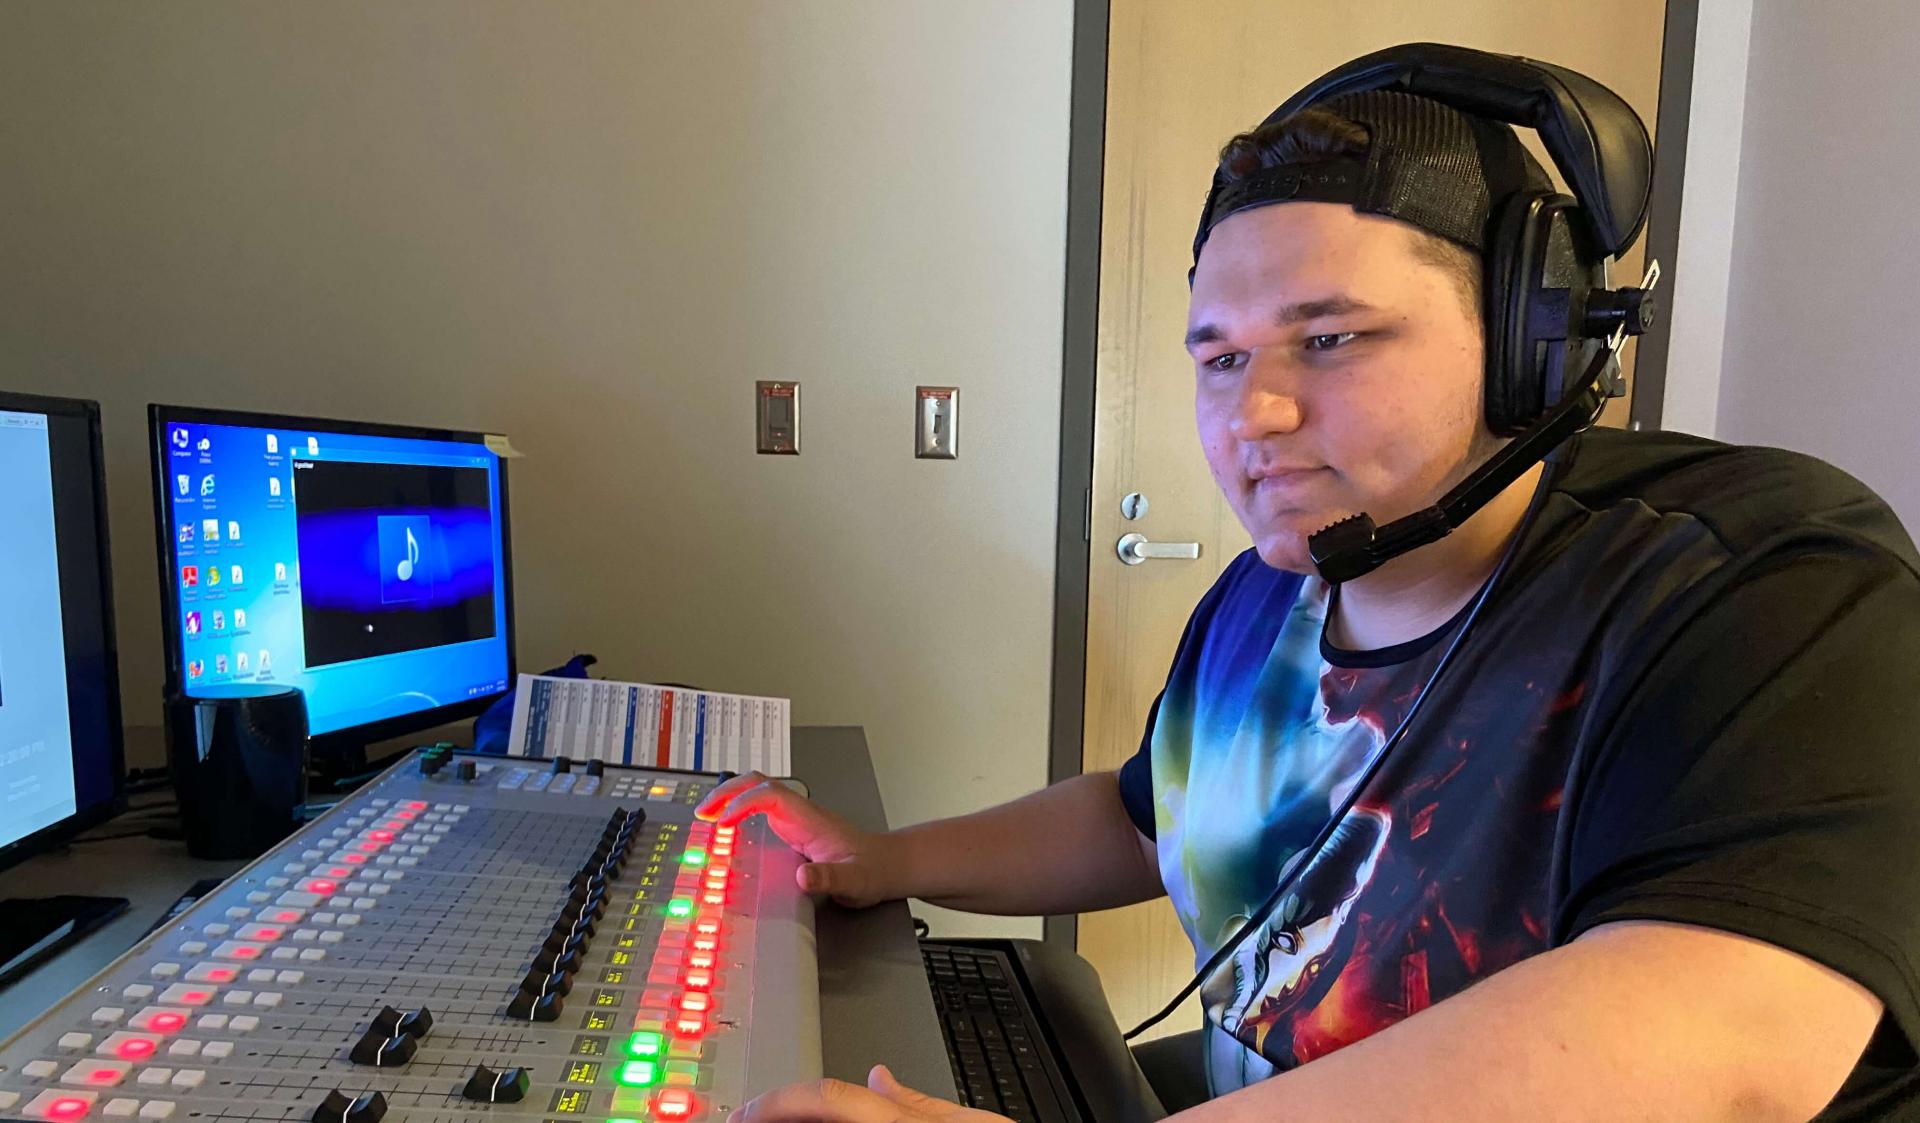 Student works in audio booth